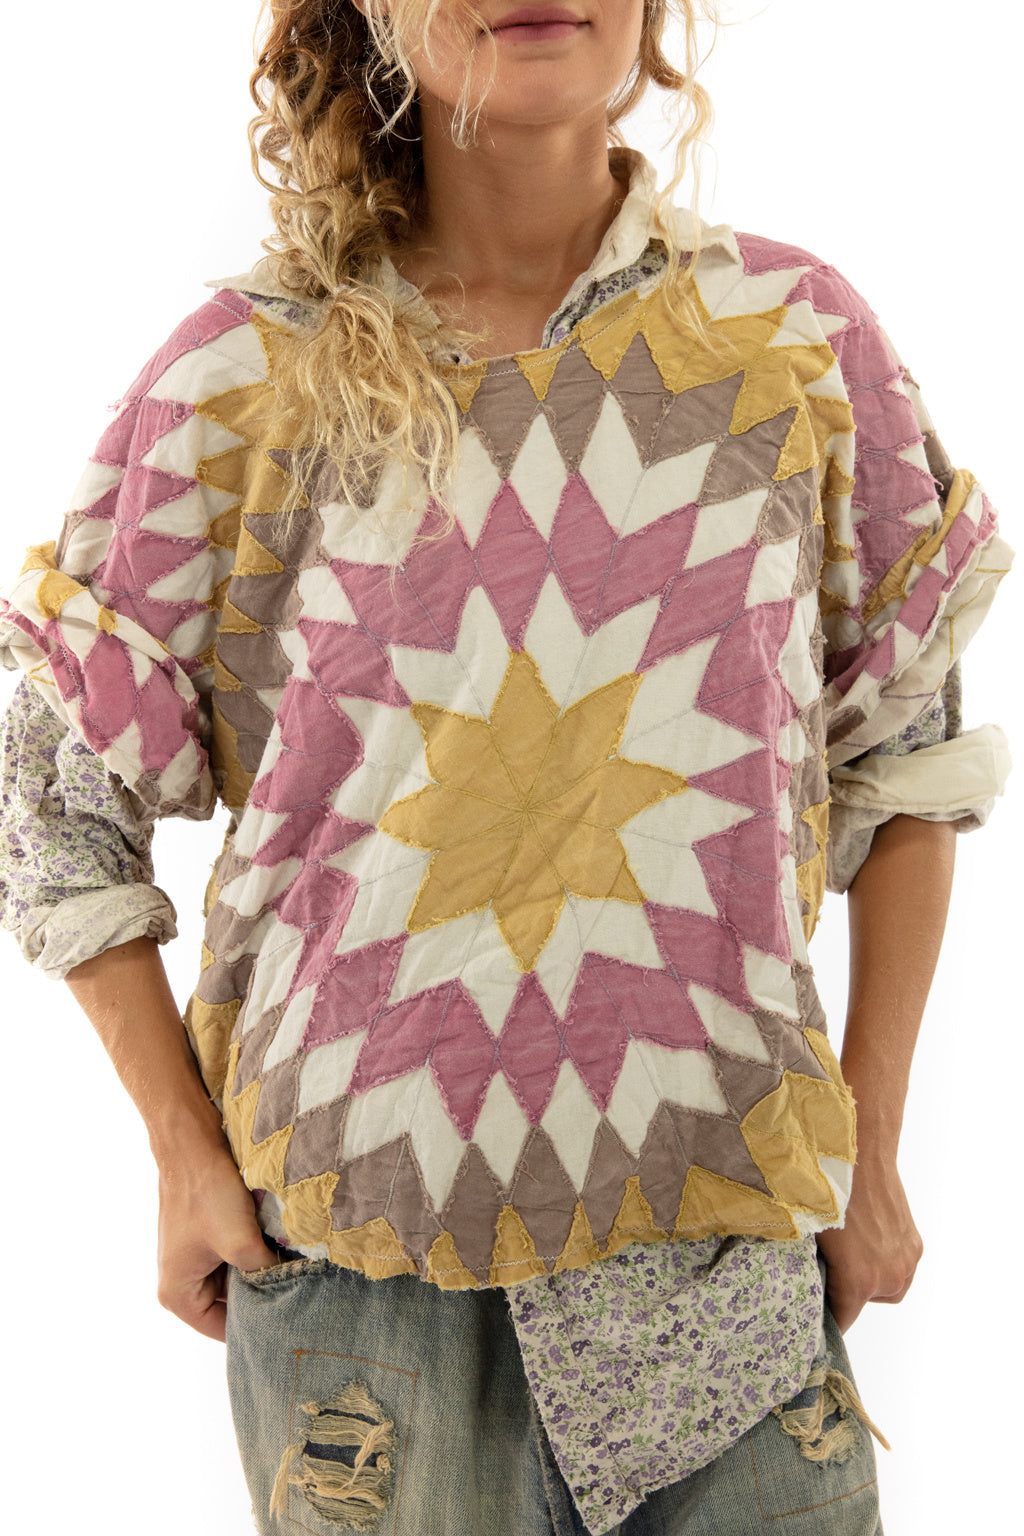 Top 1070 -Quiltwork Matilda Top -One Size